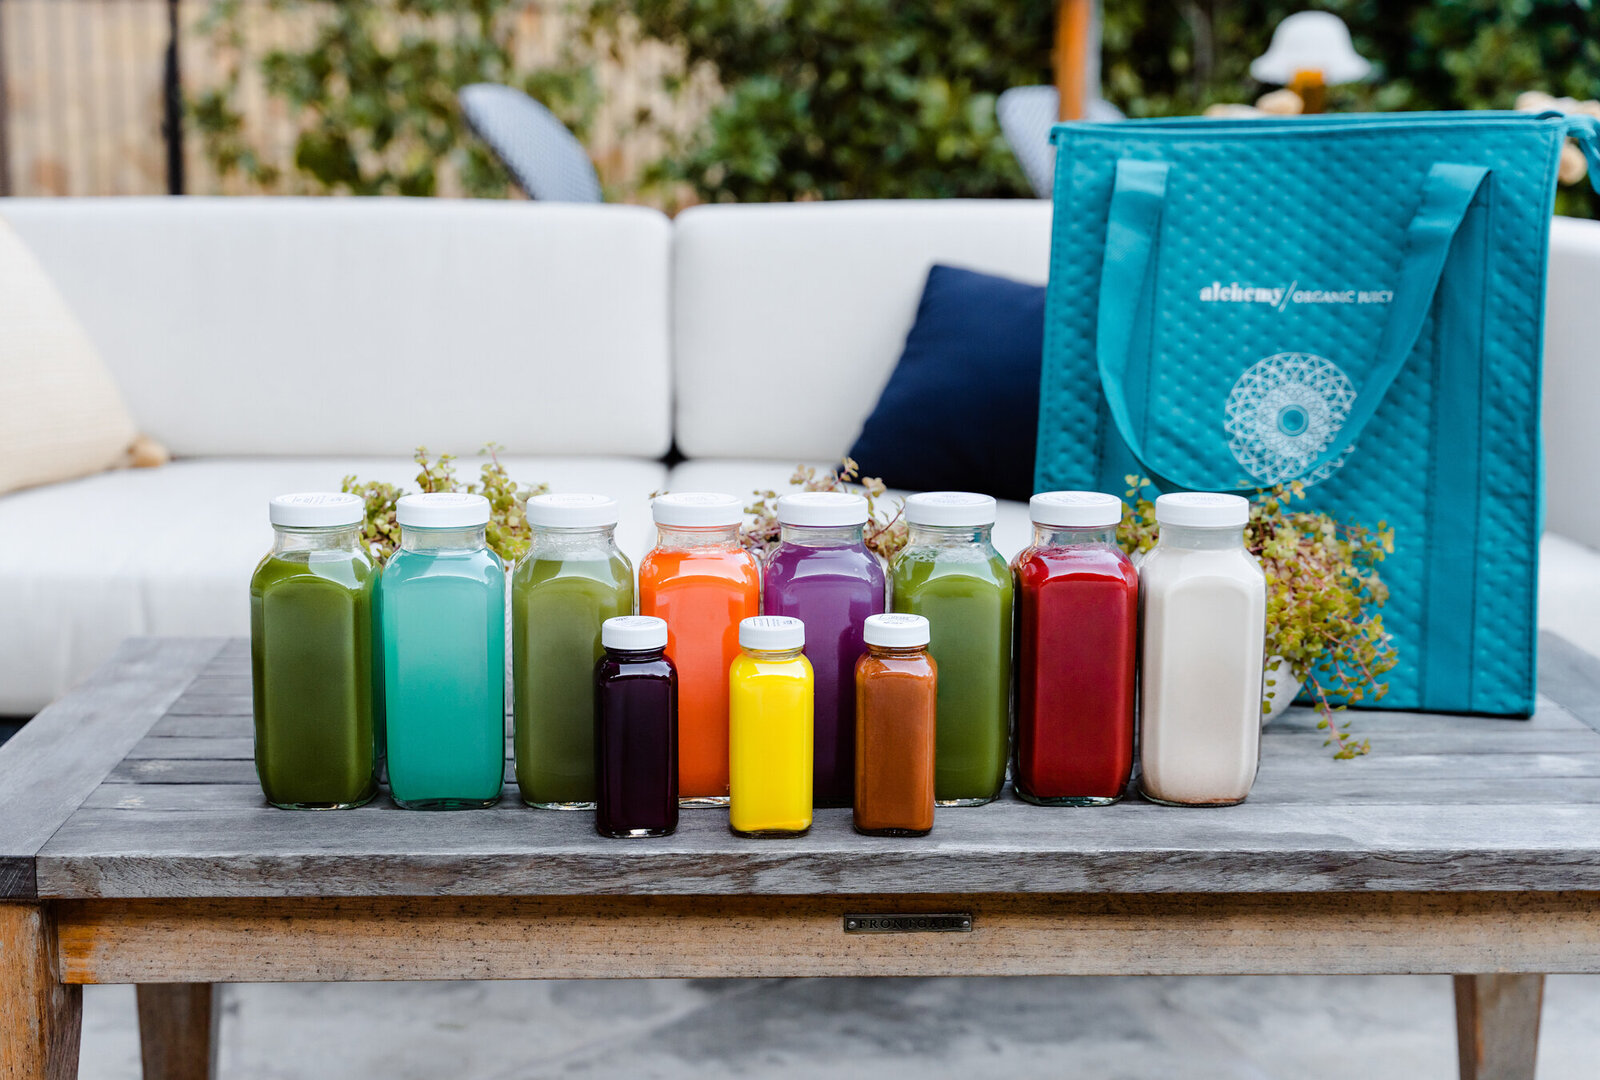 Branding Photographer, a large number of different juices are displayed on an outdoor table